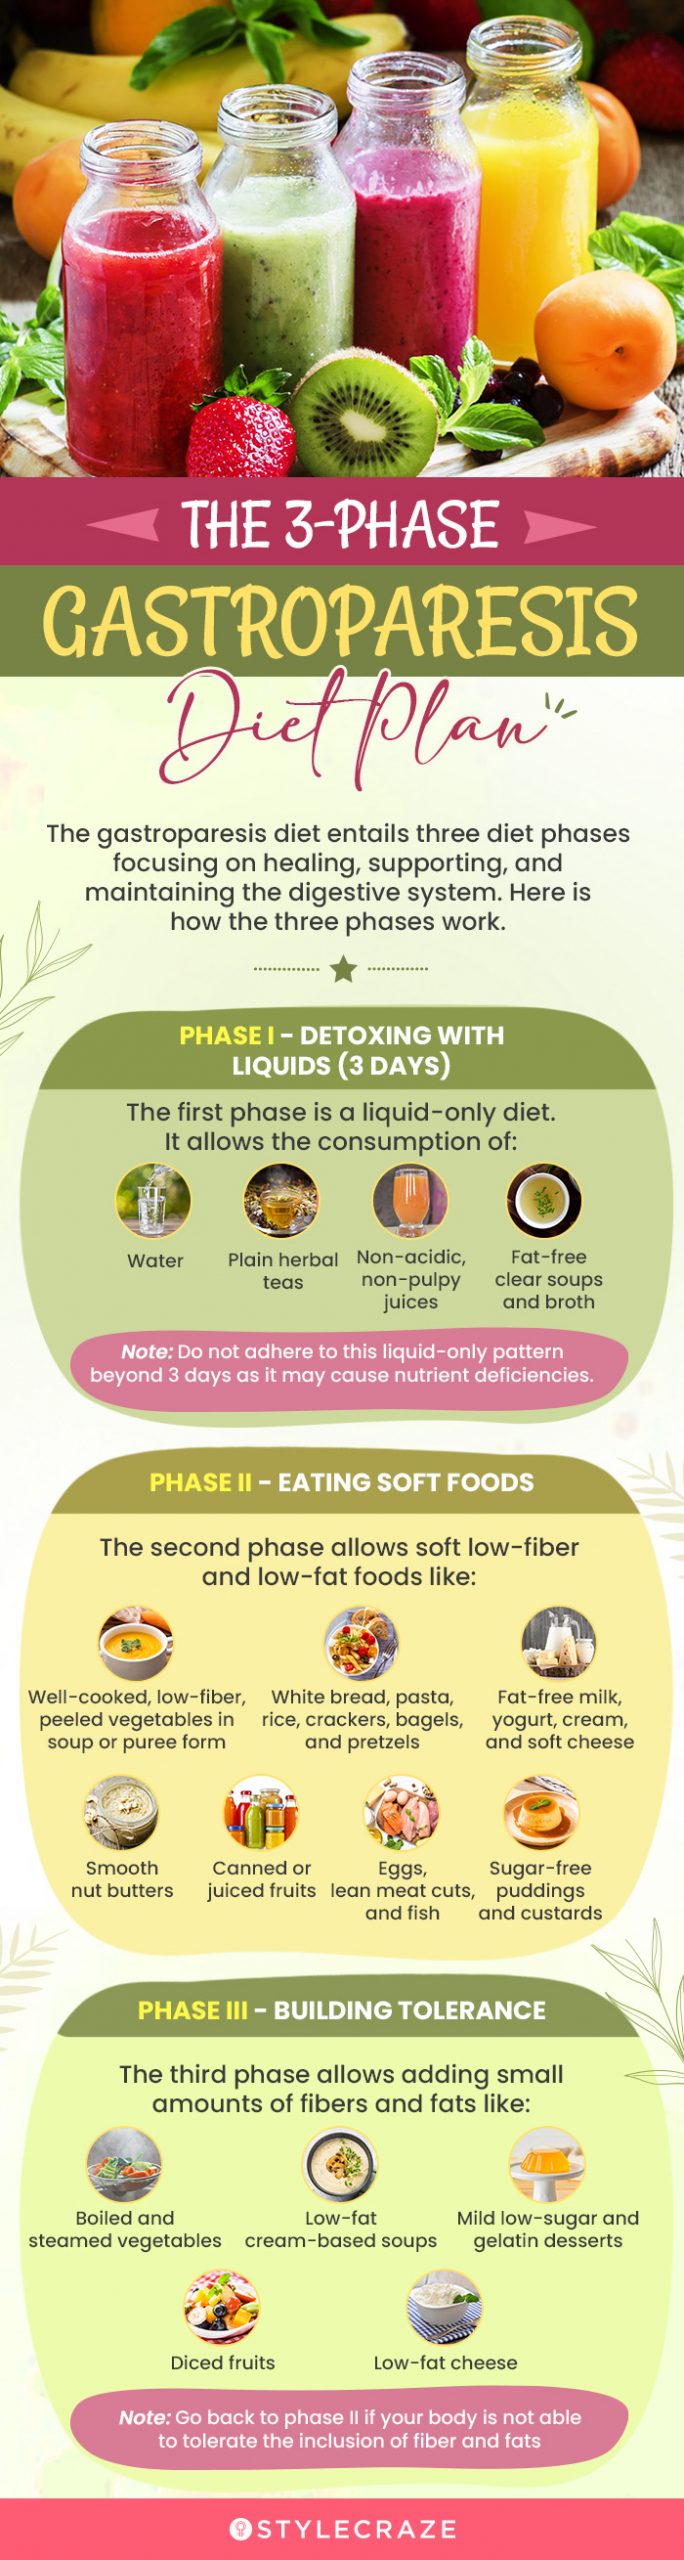 the 3 phase gastroparesis diet plan (infographic)